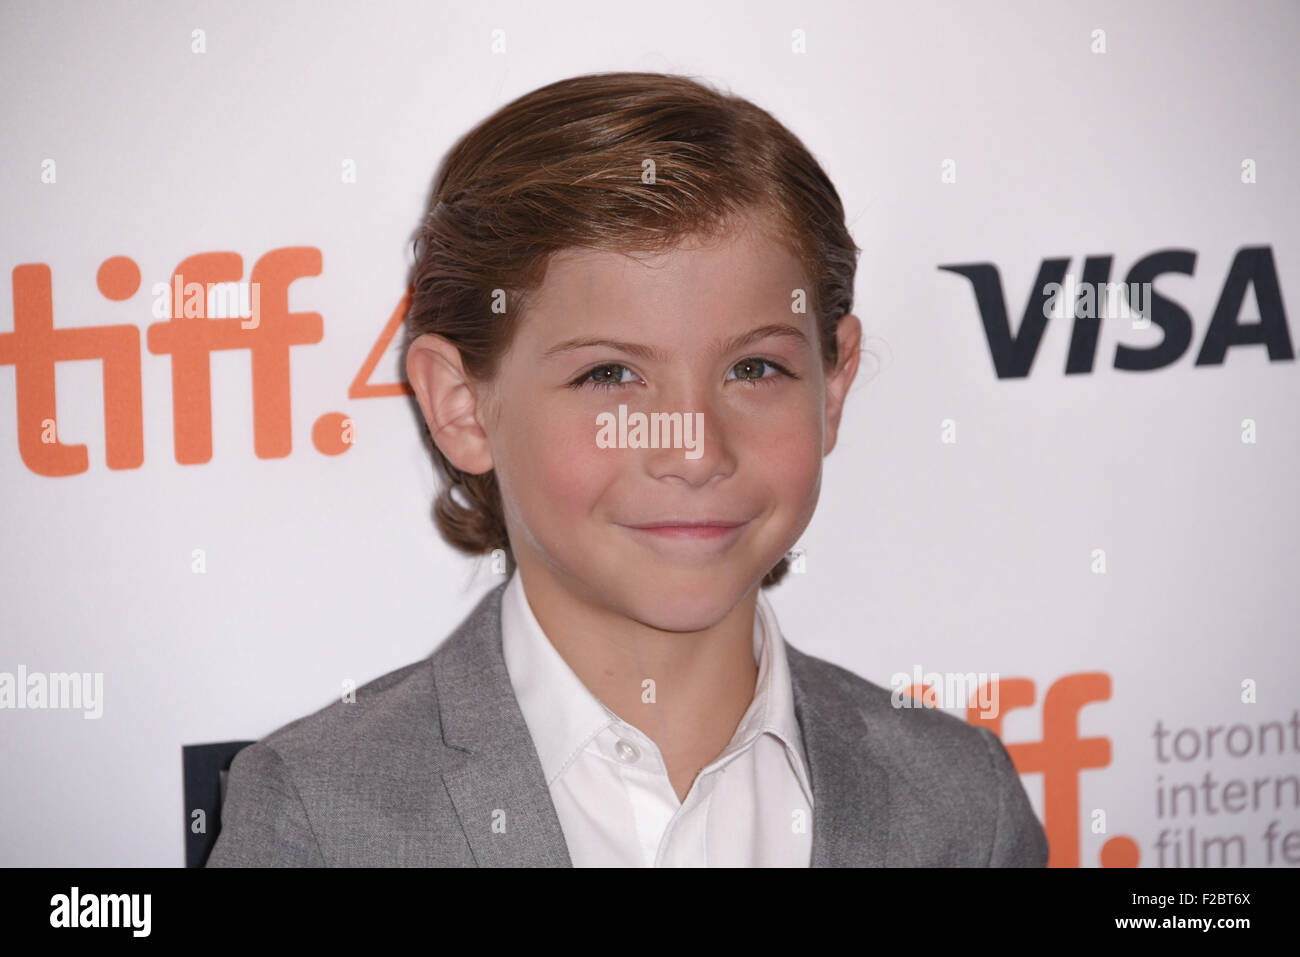 Toronto Ontario Canada 15th Sep 15 Actor Jacob Tremblay Attends The Room Premiere During The 15 Toronto International Film Festival At The Princess Of Wales Theatre On September 15 15 In Toronto